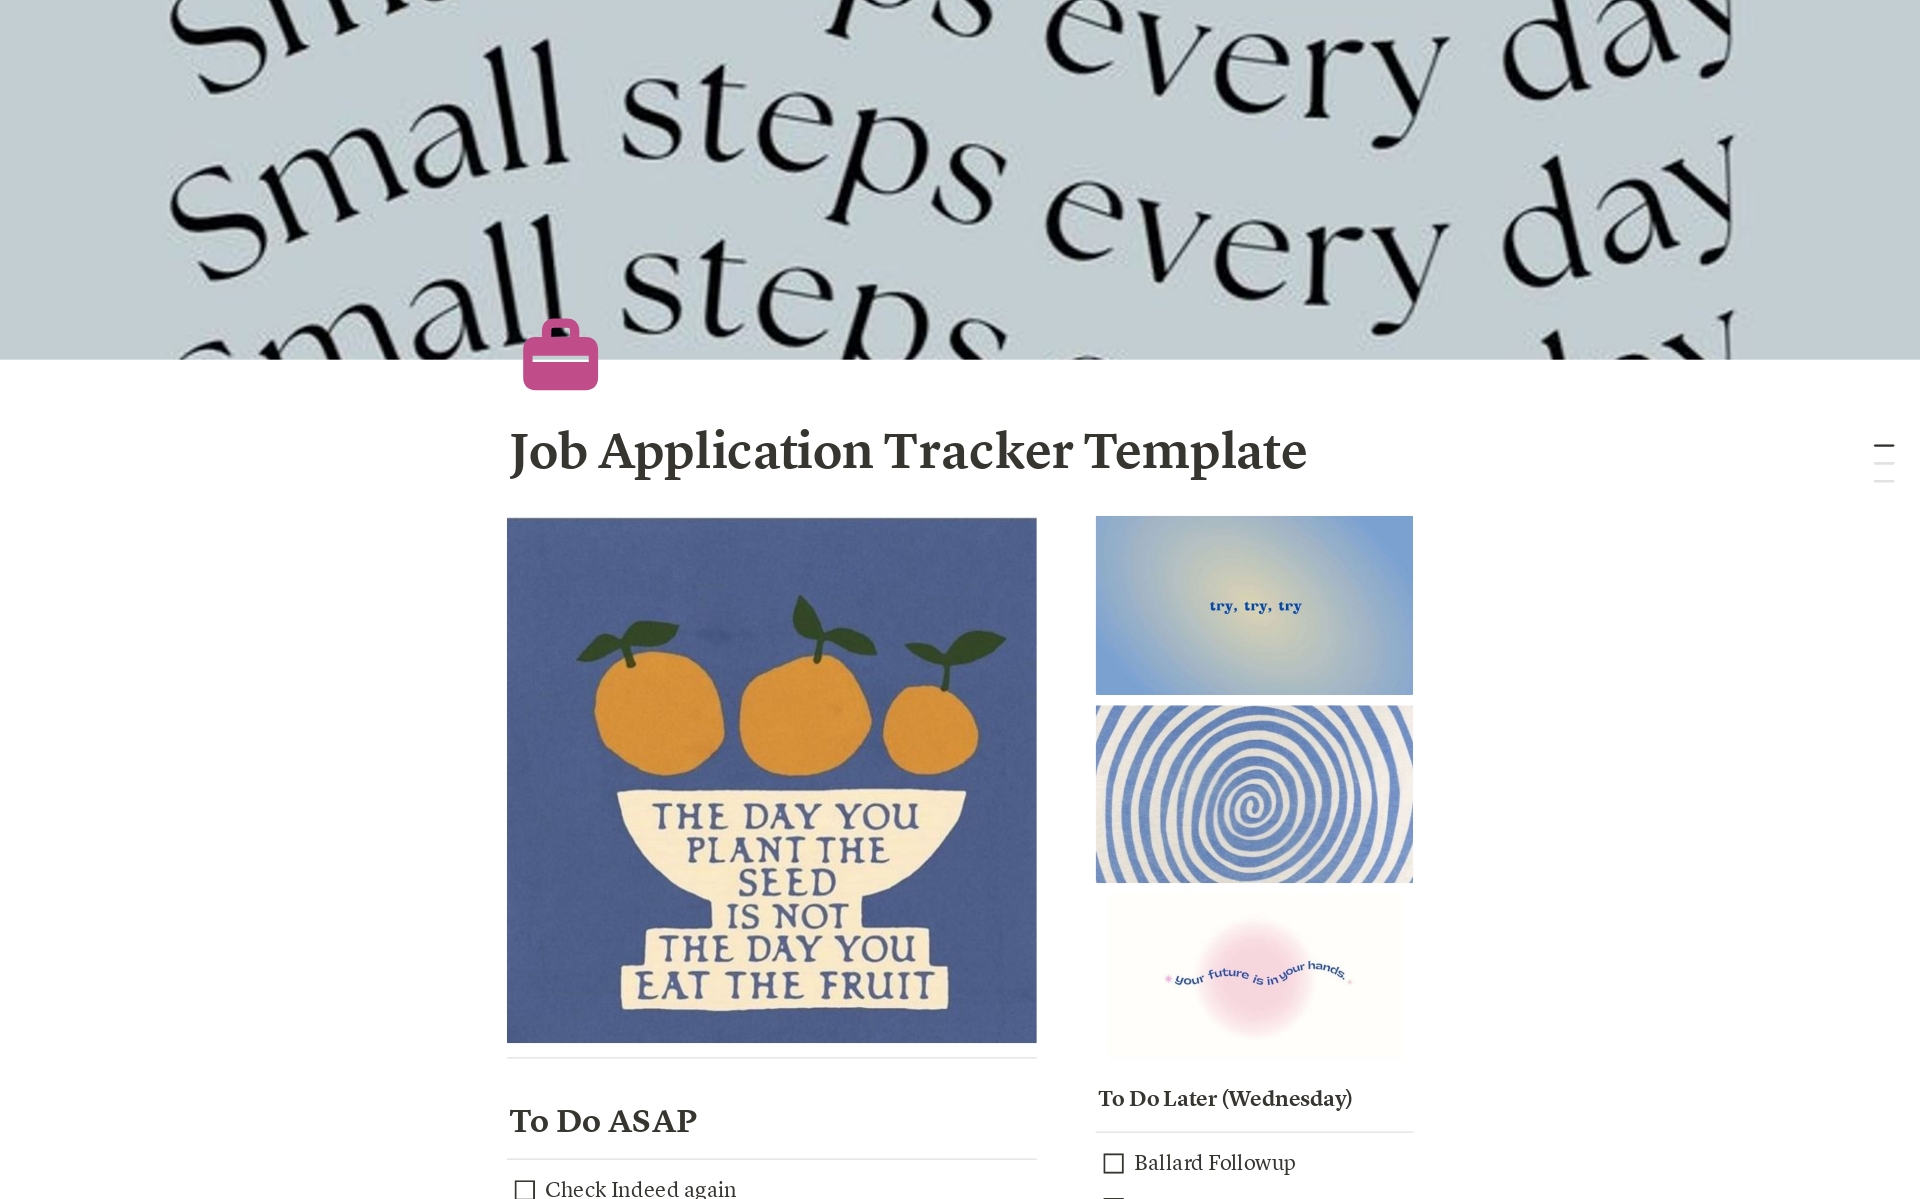 A neat page to track jobs you've applied to!